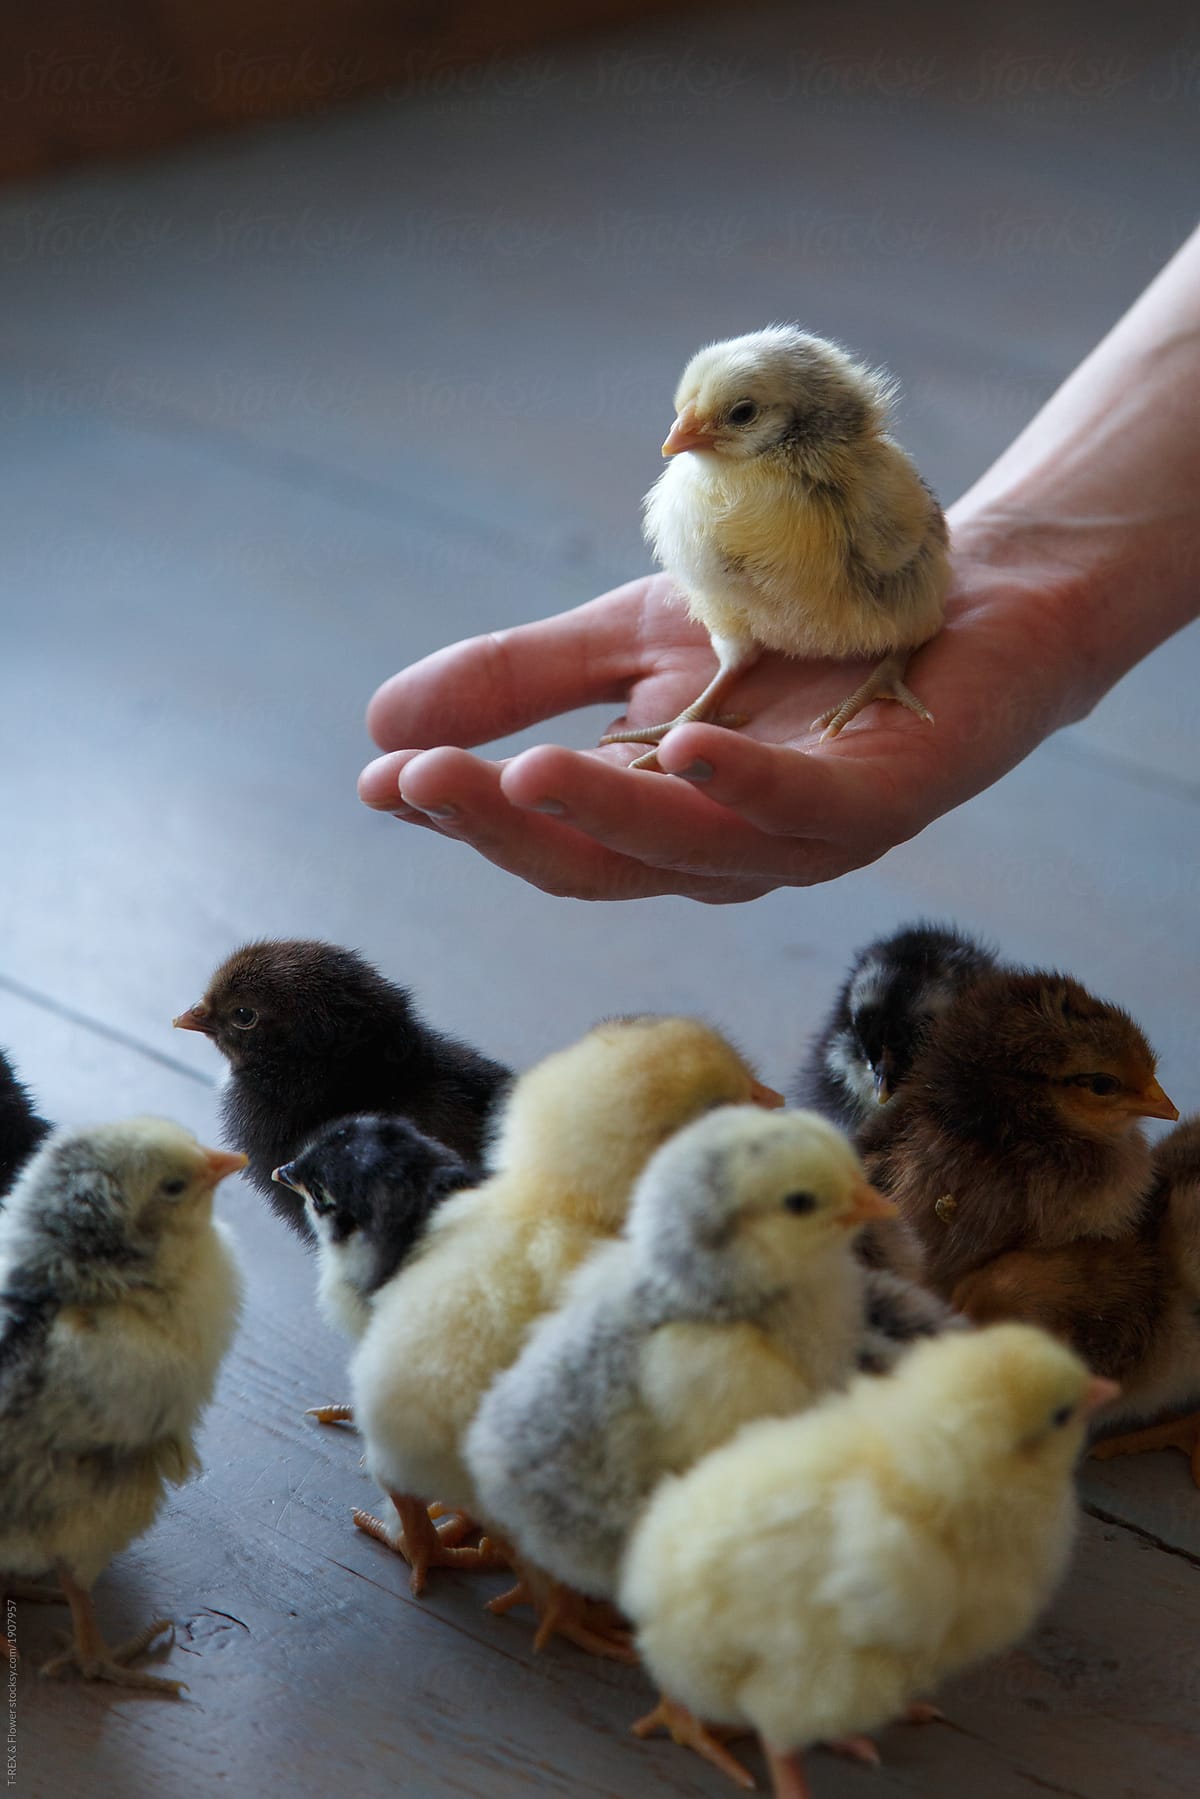 Small yellow chicken sitting in hand